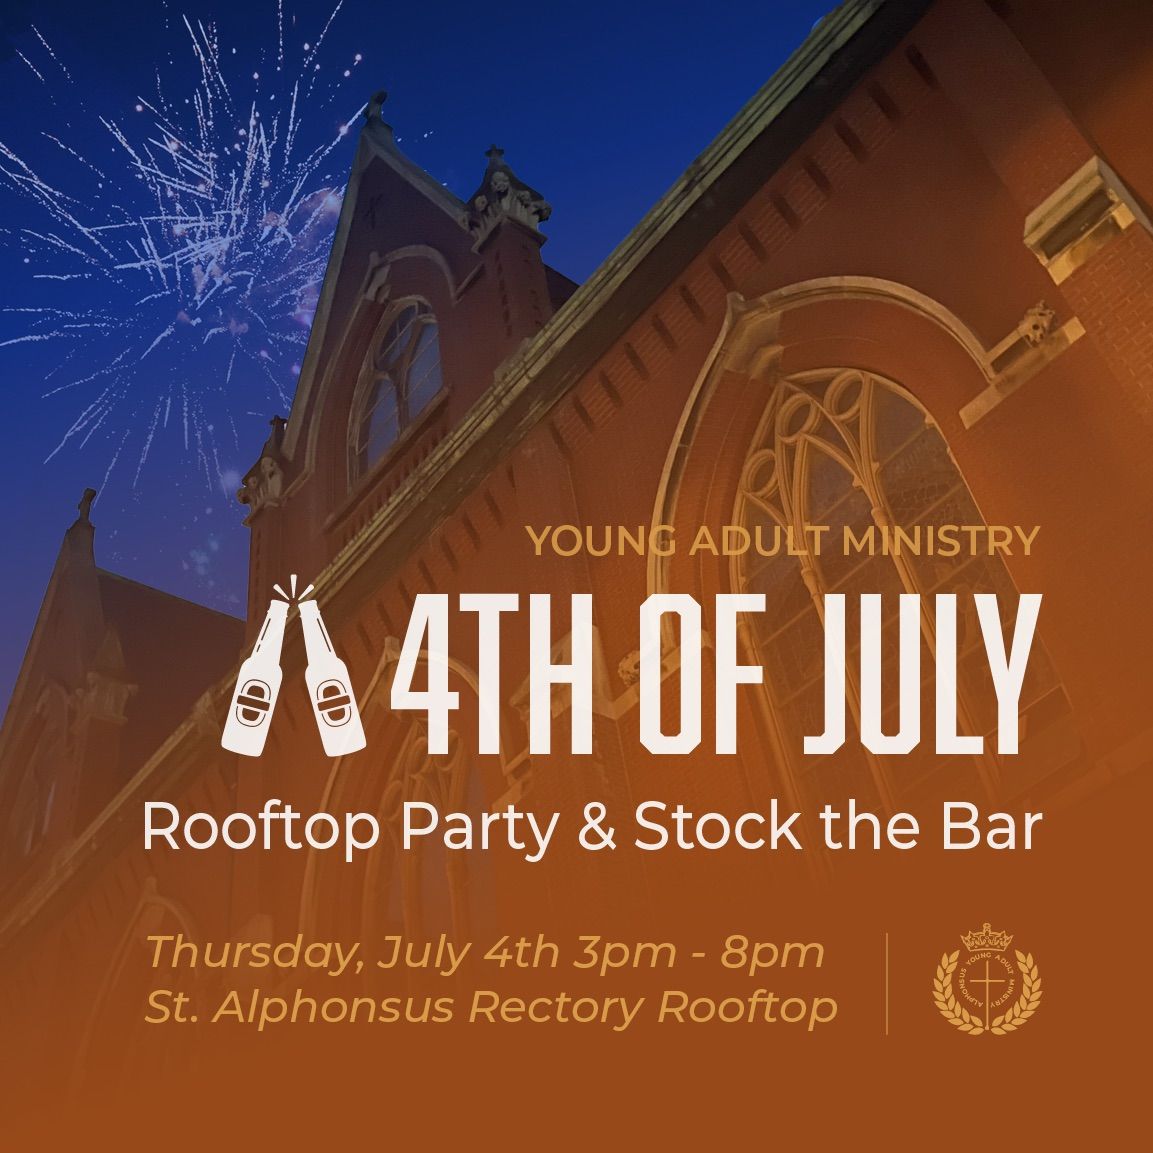 YAM 4th of July Rooftop Party & Stock the Bar